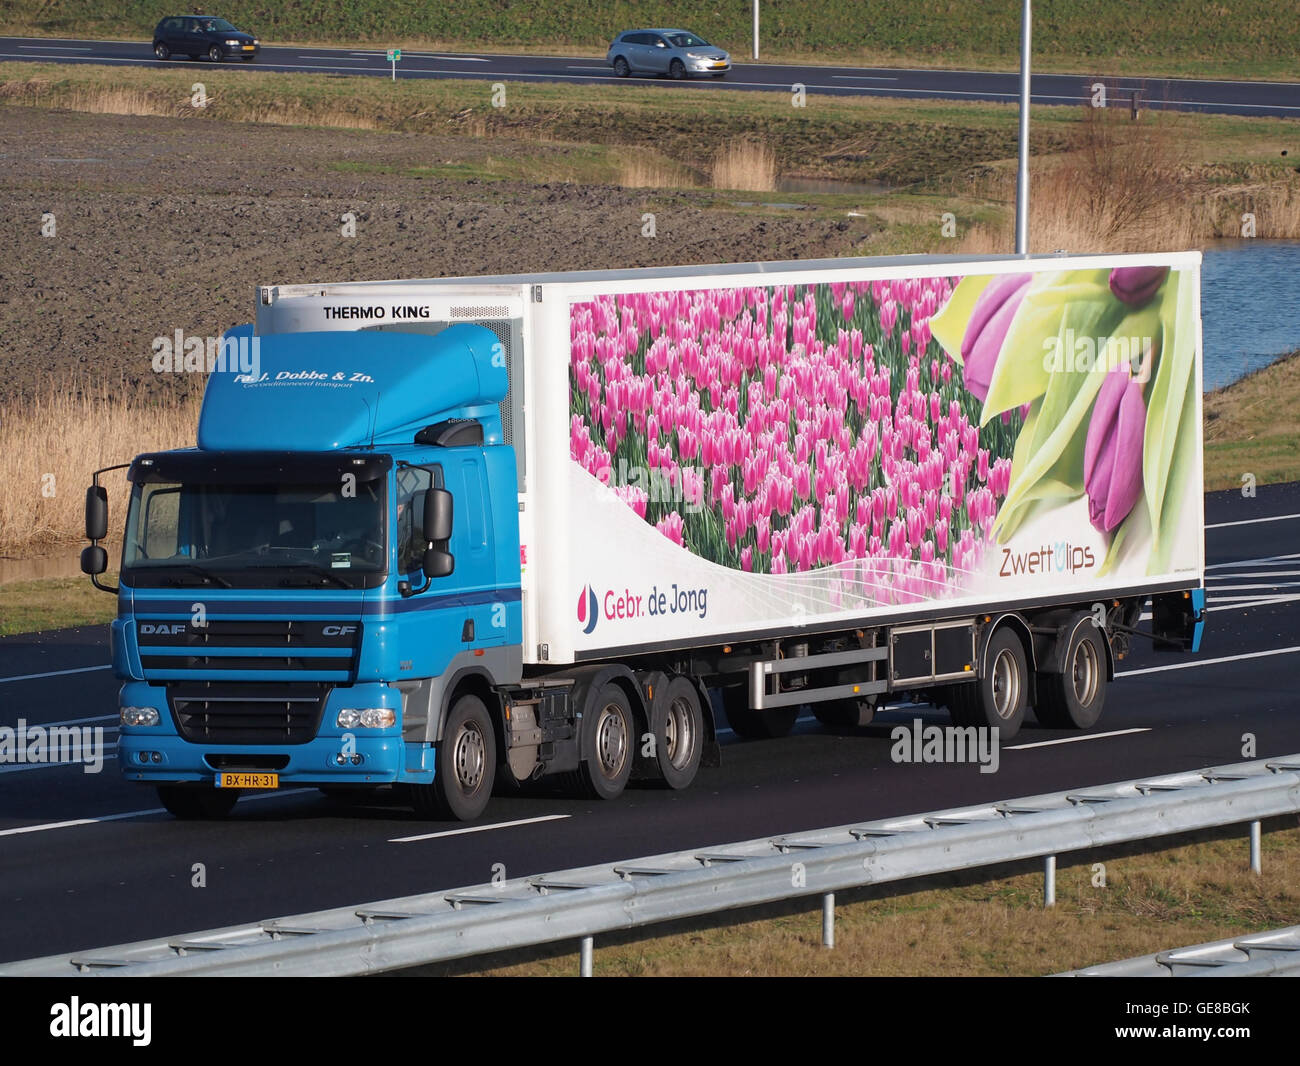 DAF 410 FA J, Dobbe & Zn, Zwettulips Banque D'Images